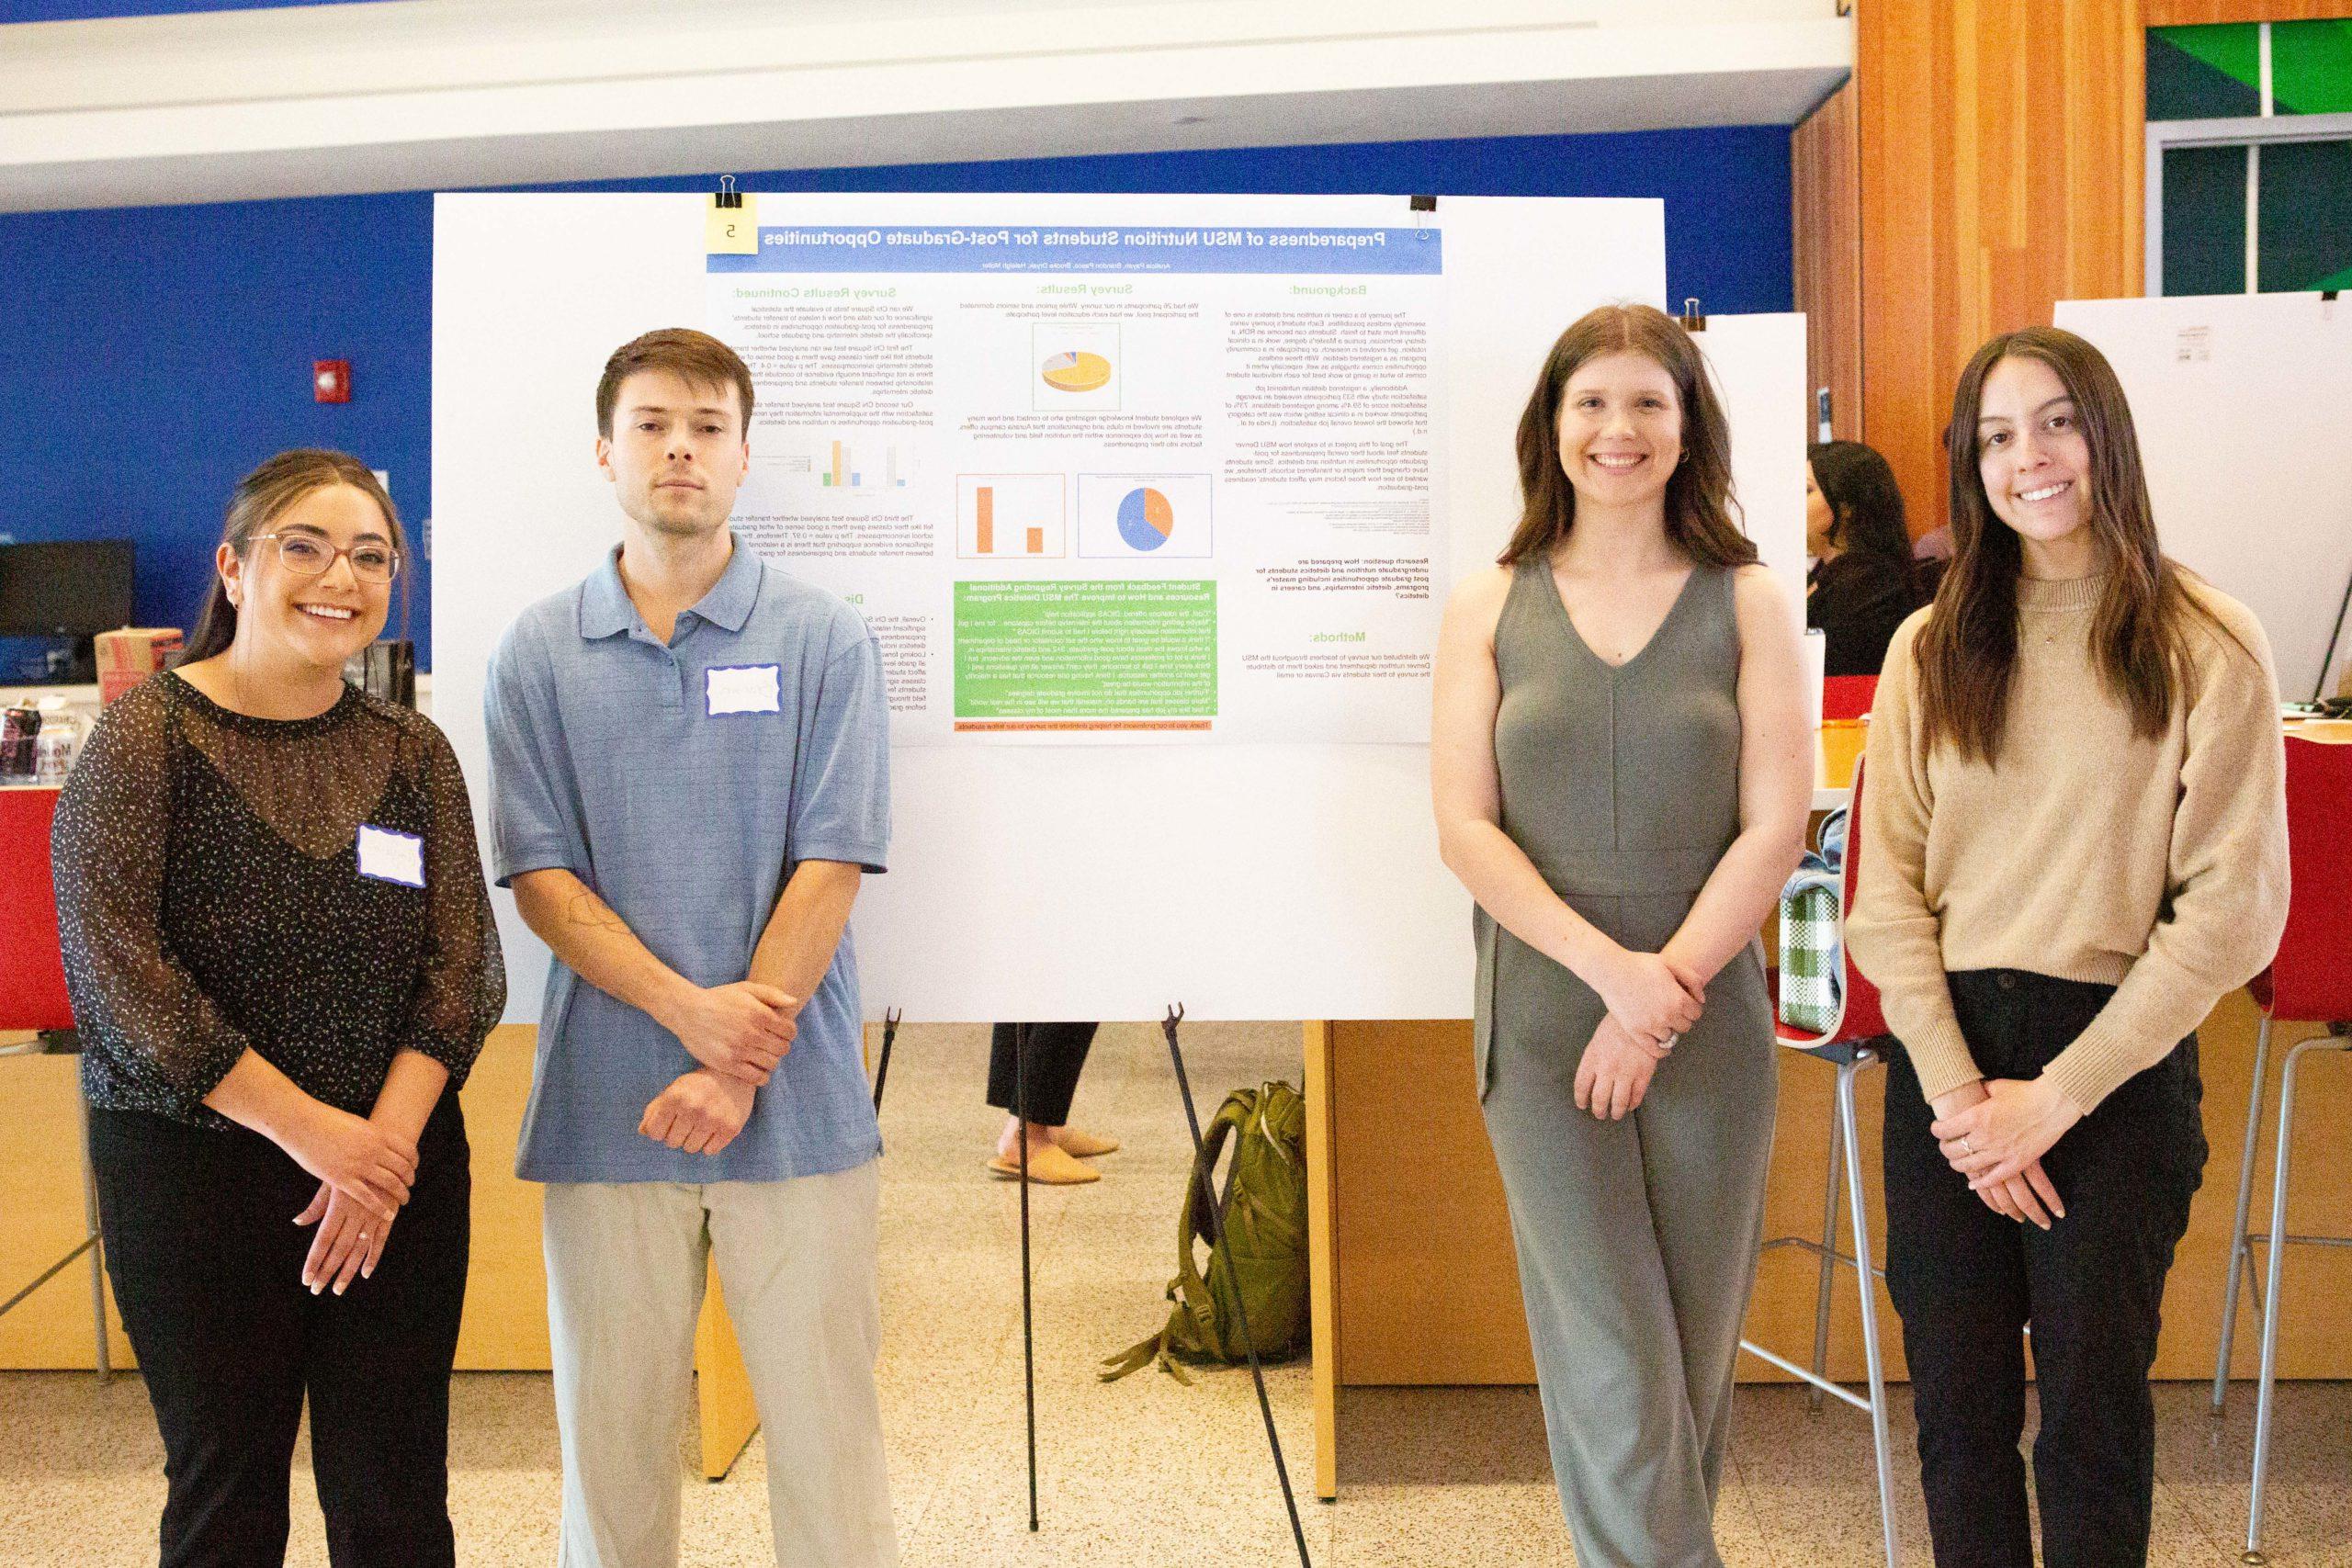 Students presenting at a conference